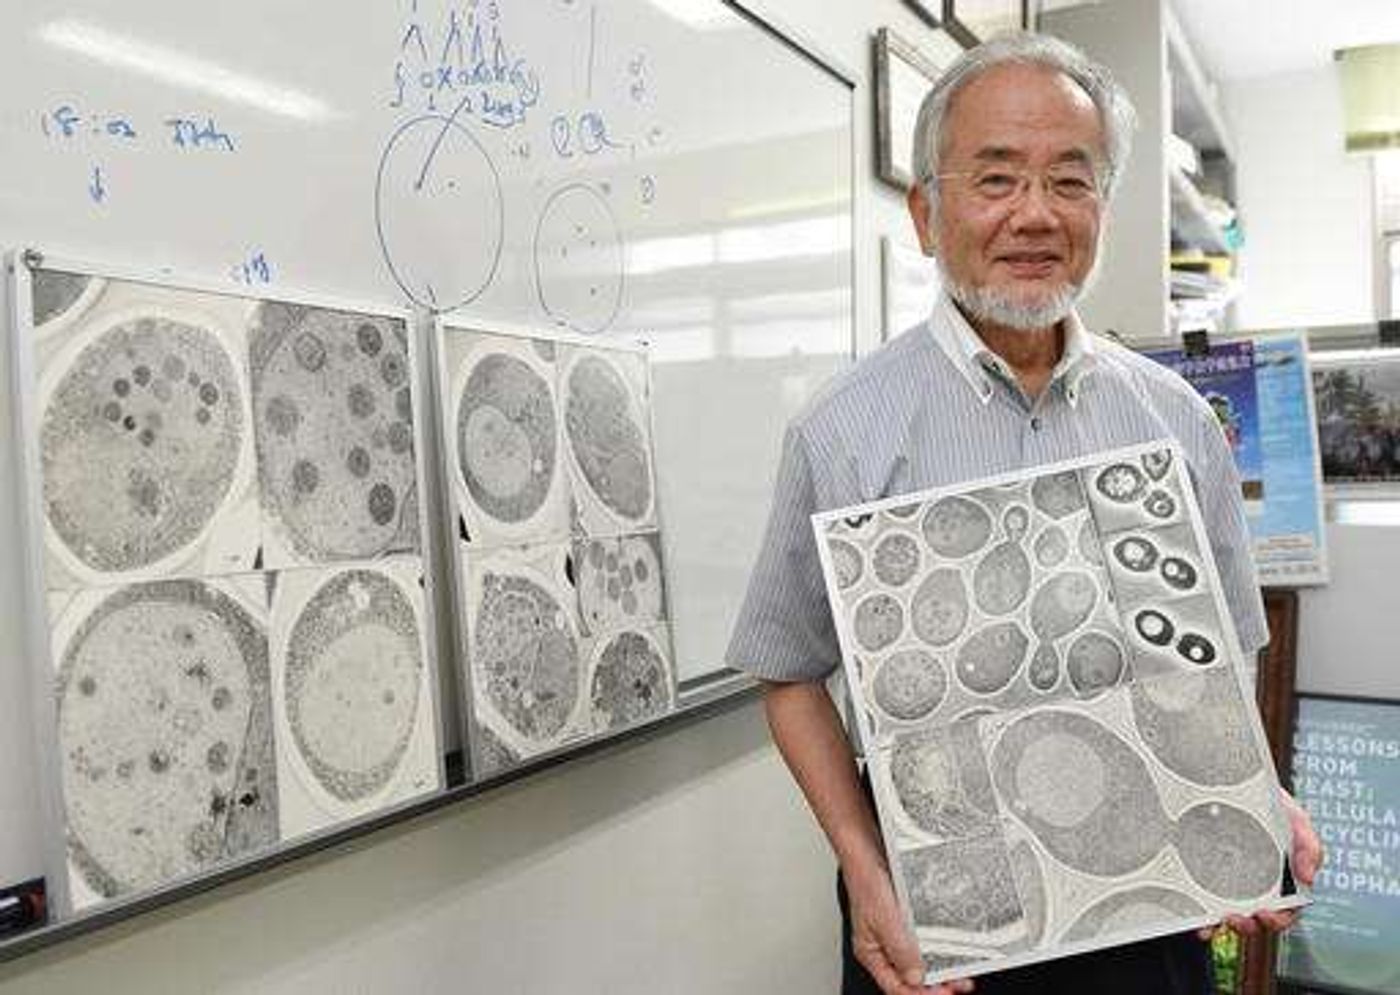 n this July, 2016 photo, Japanese scientist Yoshinori Ohsumi smiles at the Tokyo Institute of Technology campus in Yokohama, south of Tokyo. Ohsumi was awarded this year's Nobel Prize in medicine on Monday, Oct. 3, for discoveries related to the degrading and recycling of cellular components. The Karolinska Institute honored Ohsumi for "brilliant experiments" in the 1990s on autophagy, the machinery with which cells recycle their content. Disrupted autophagy has been linked to various diseases. /Credit: Akiko Matsushita/Kyodo News via AP